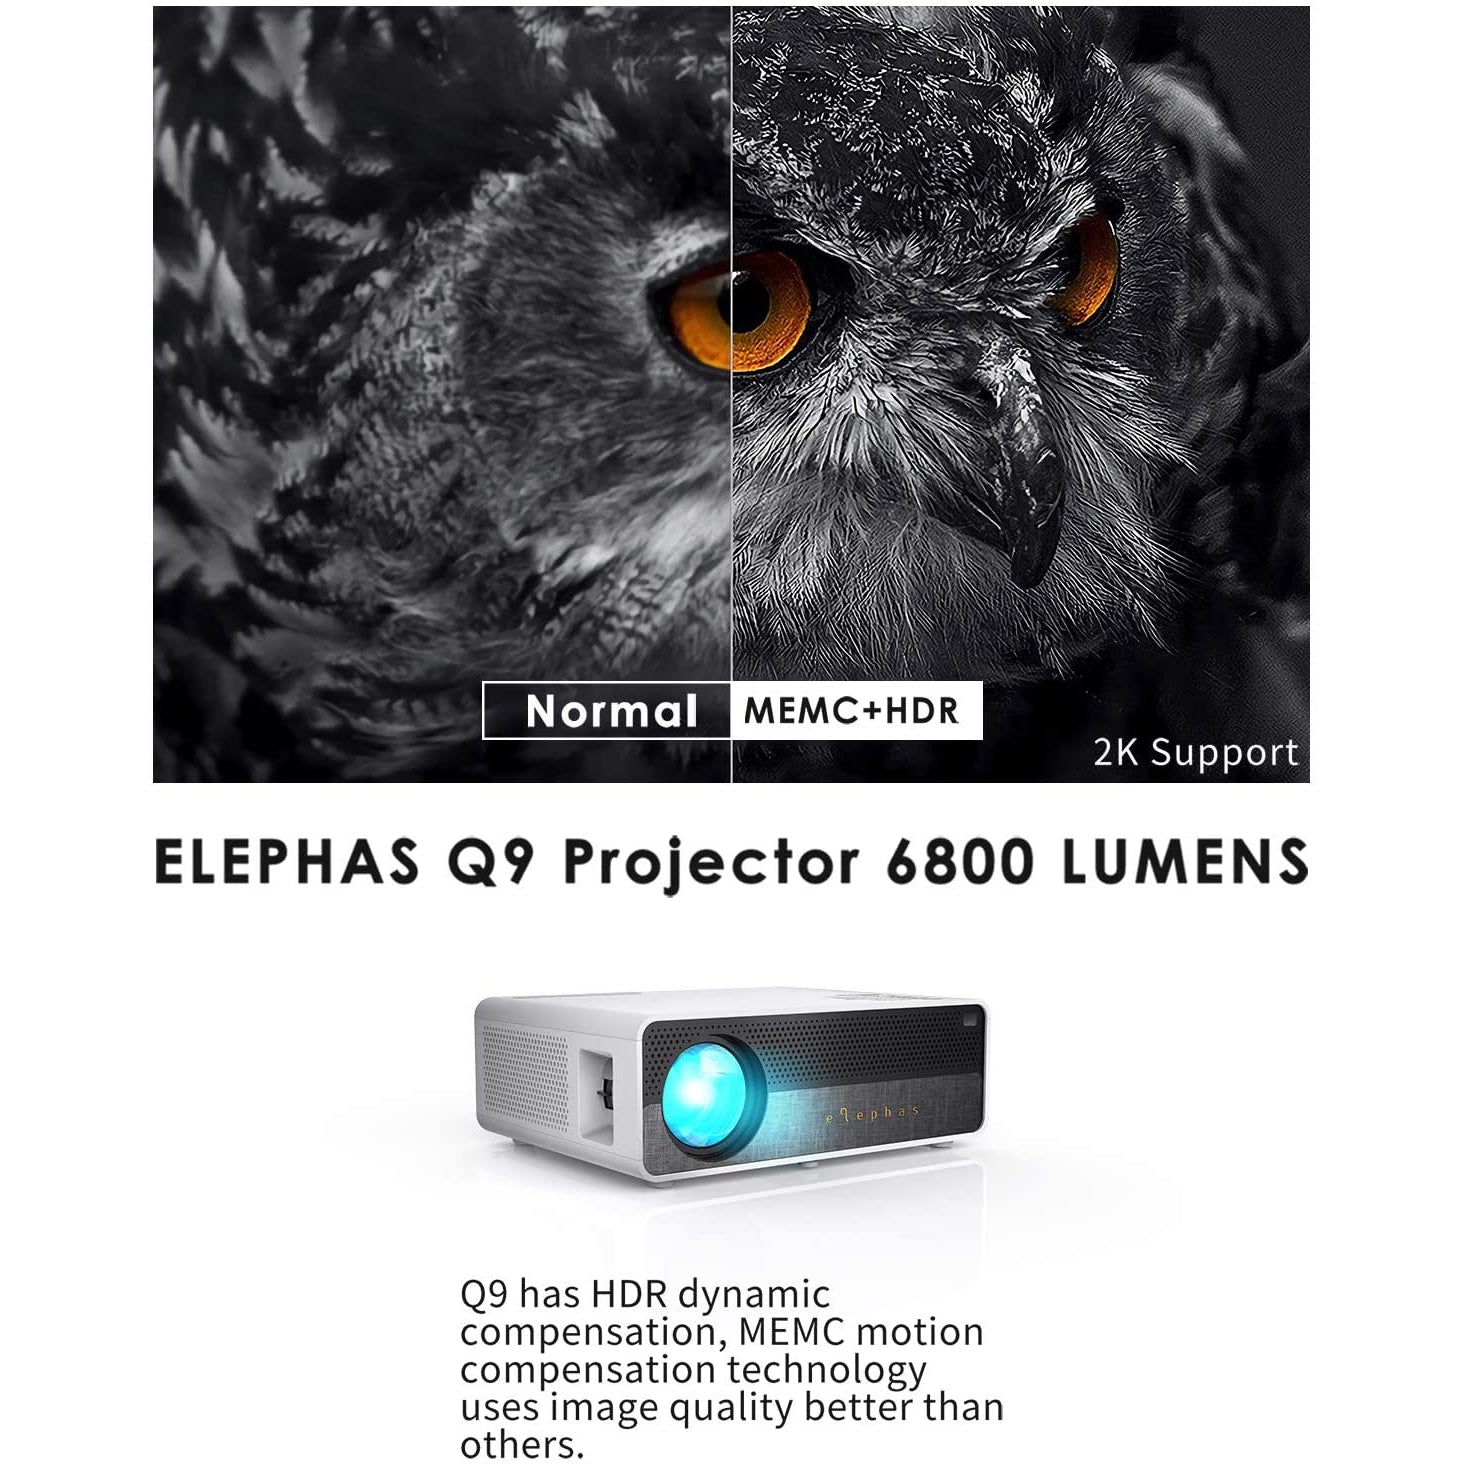 ELEPHAS Q9 Projector Native 1080P HD Video Projector Supports 2K, 6800 Lumens - White